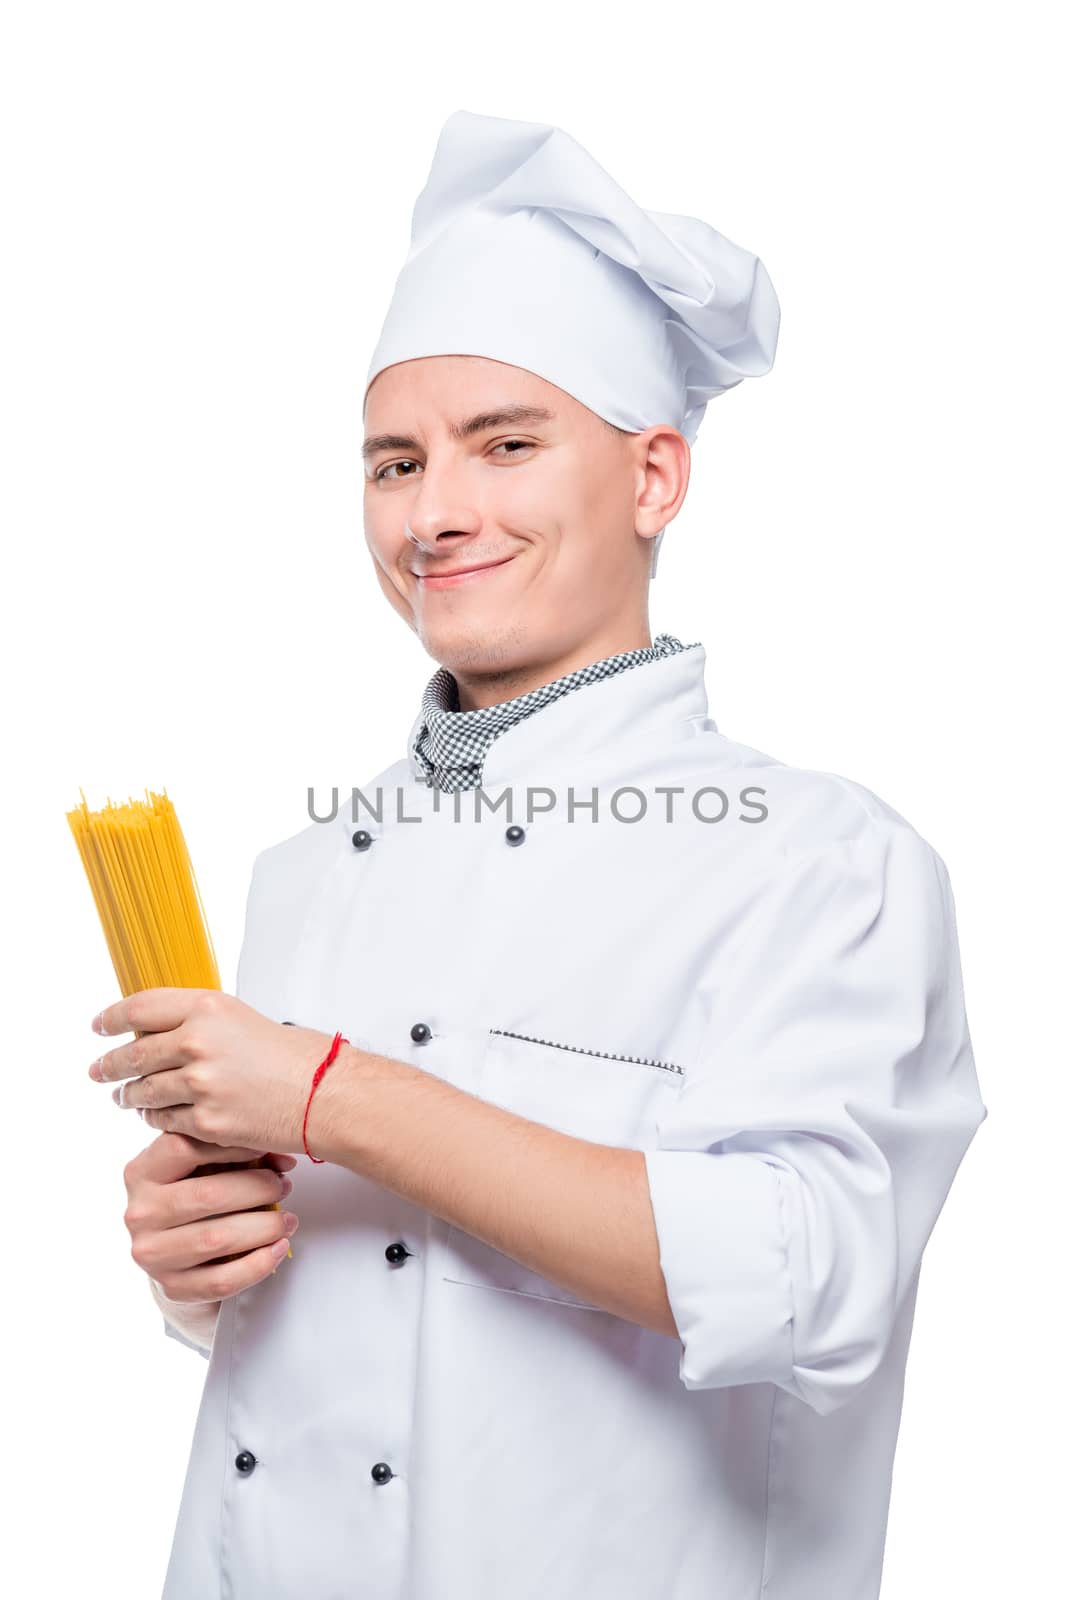 portrait of a cook with spaghetti, portrait isolated on white background